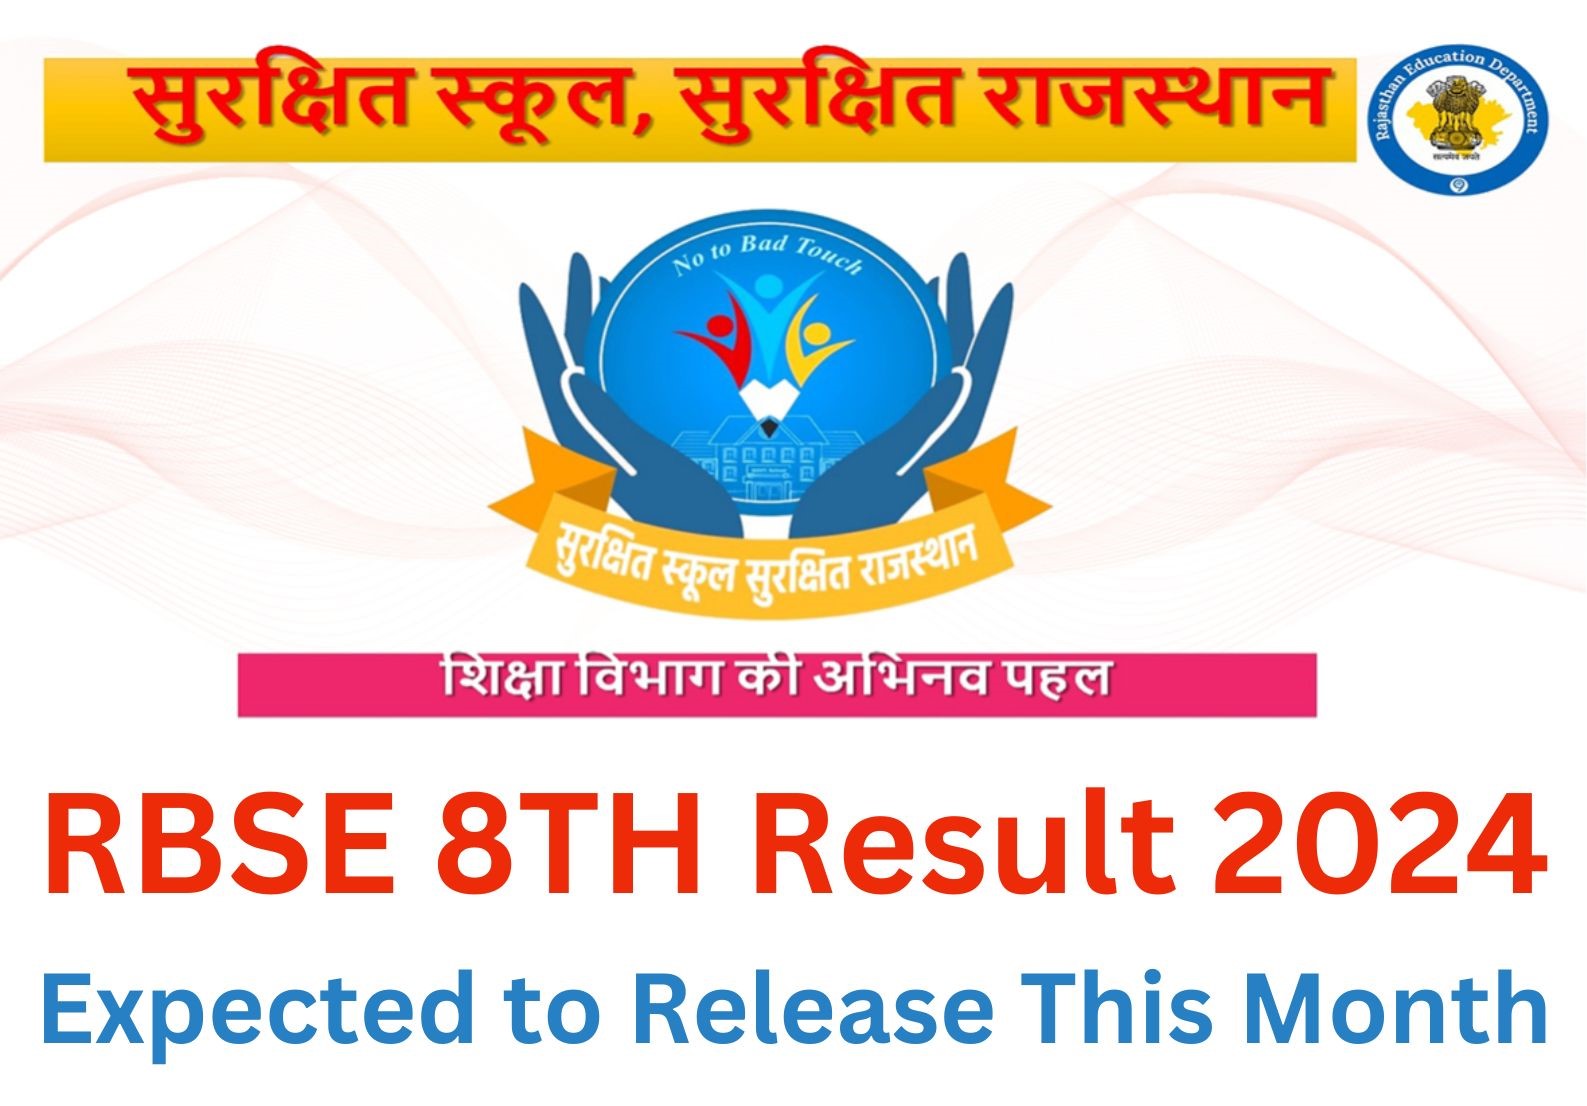 Check Your RBSE 8TH Result 2024: Expected To Release This Month